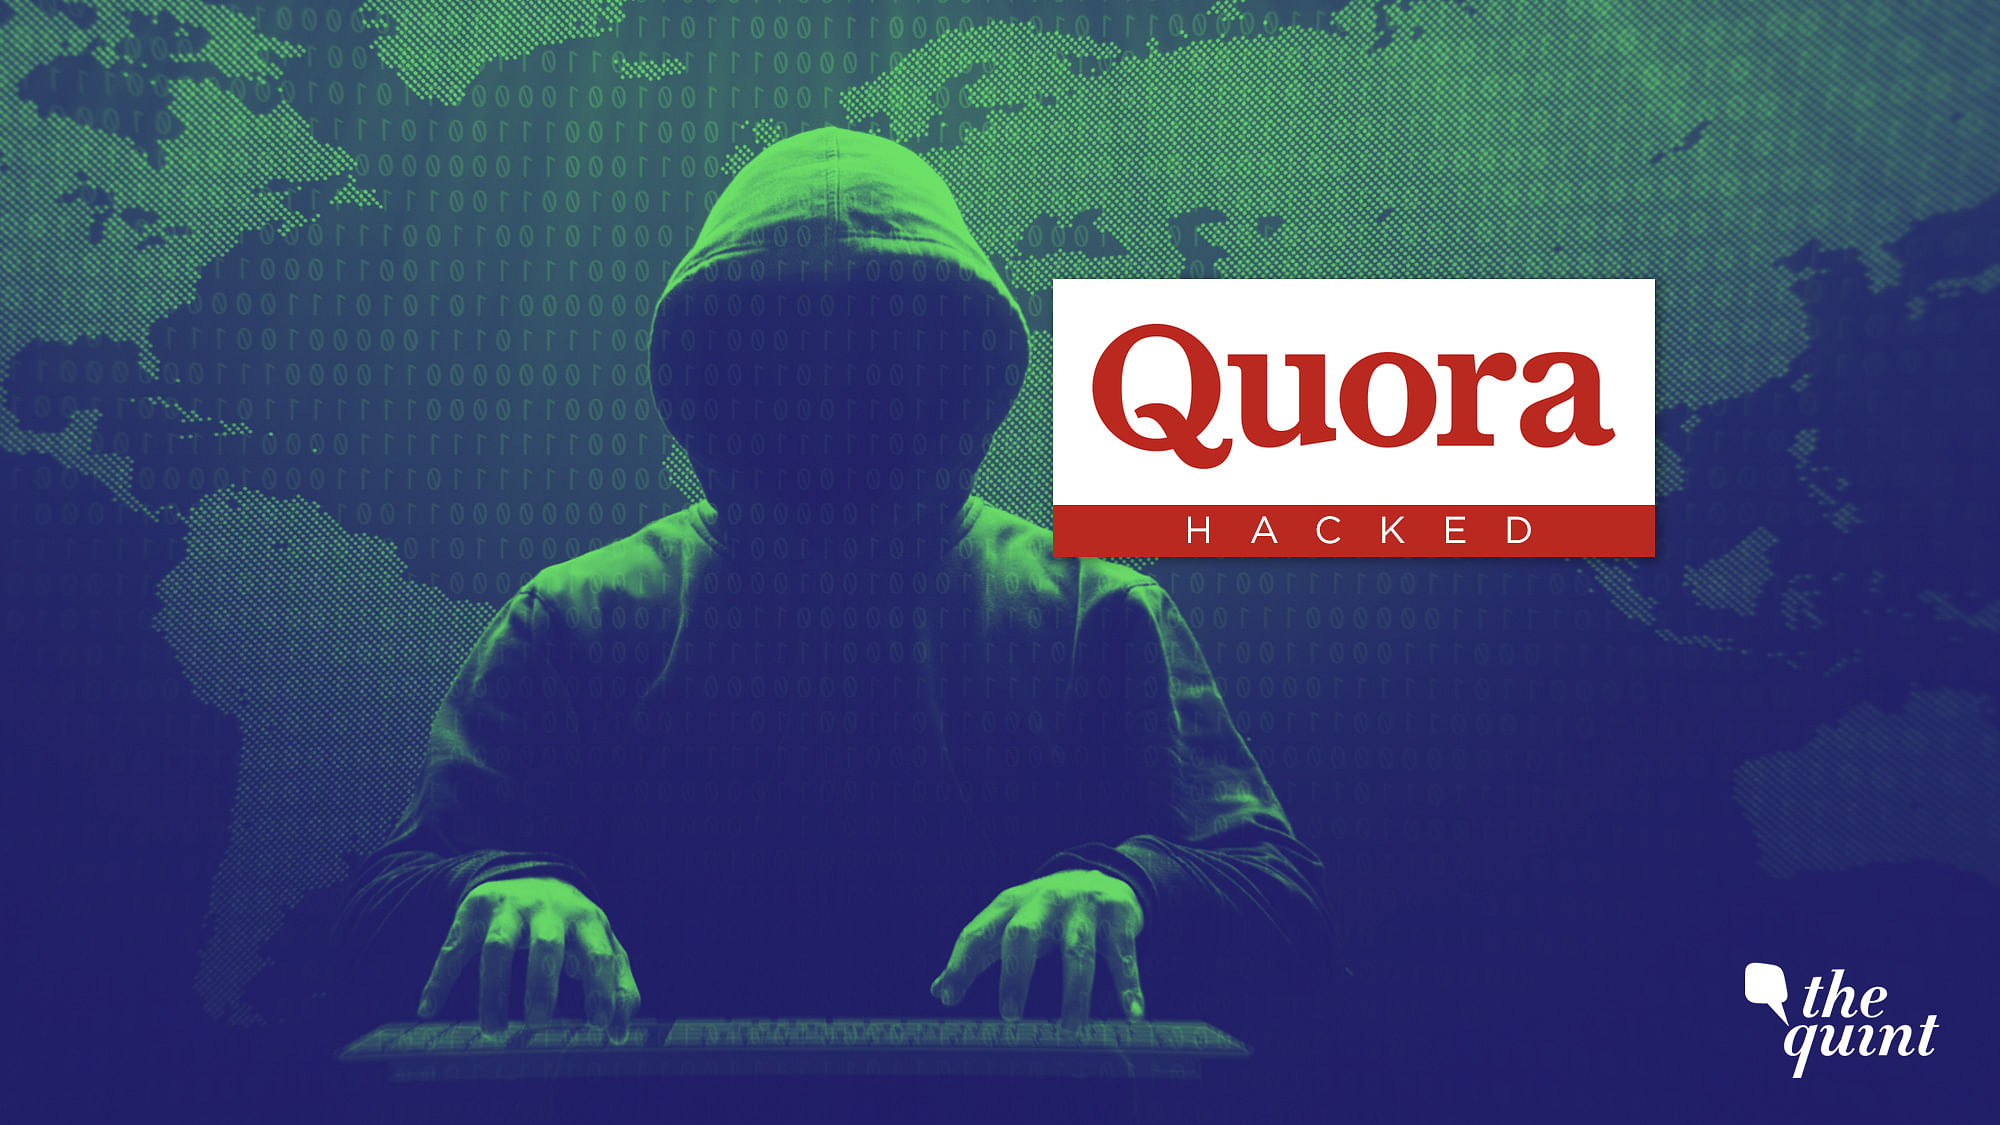 Question &amp; answer website Quora has no answers to how it was hacked.